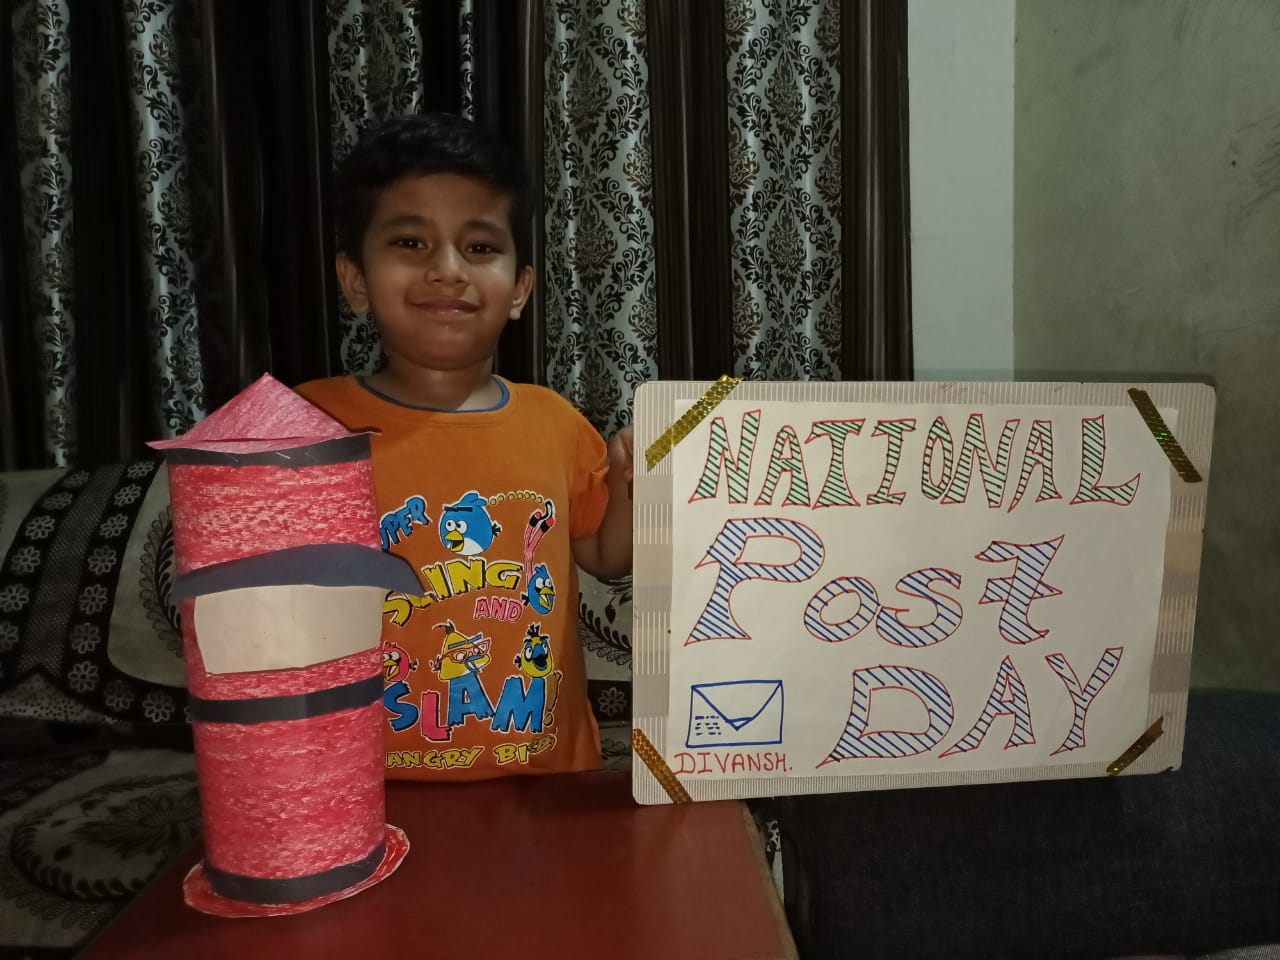 NATIONAL POST DAY